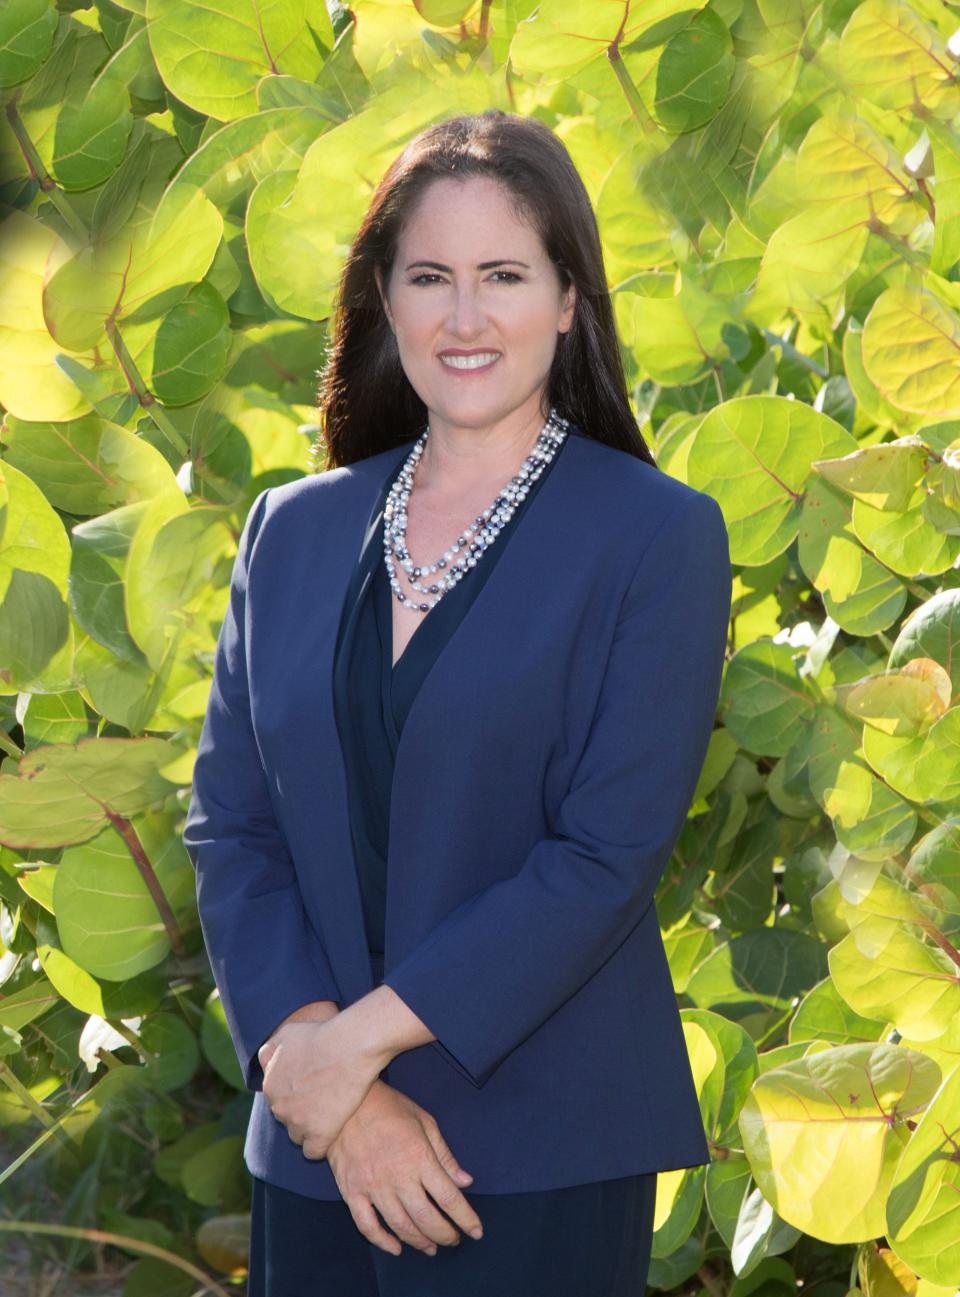 Caryn Siperstein is a candidate for Palm Beach County Circuit Court judge in the August 2022 election.